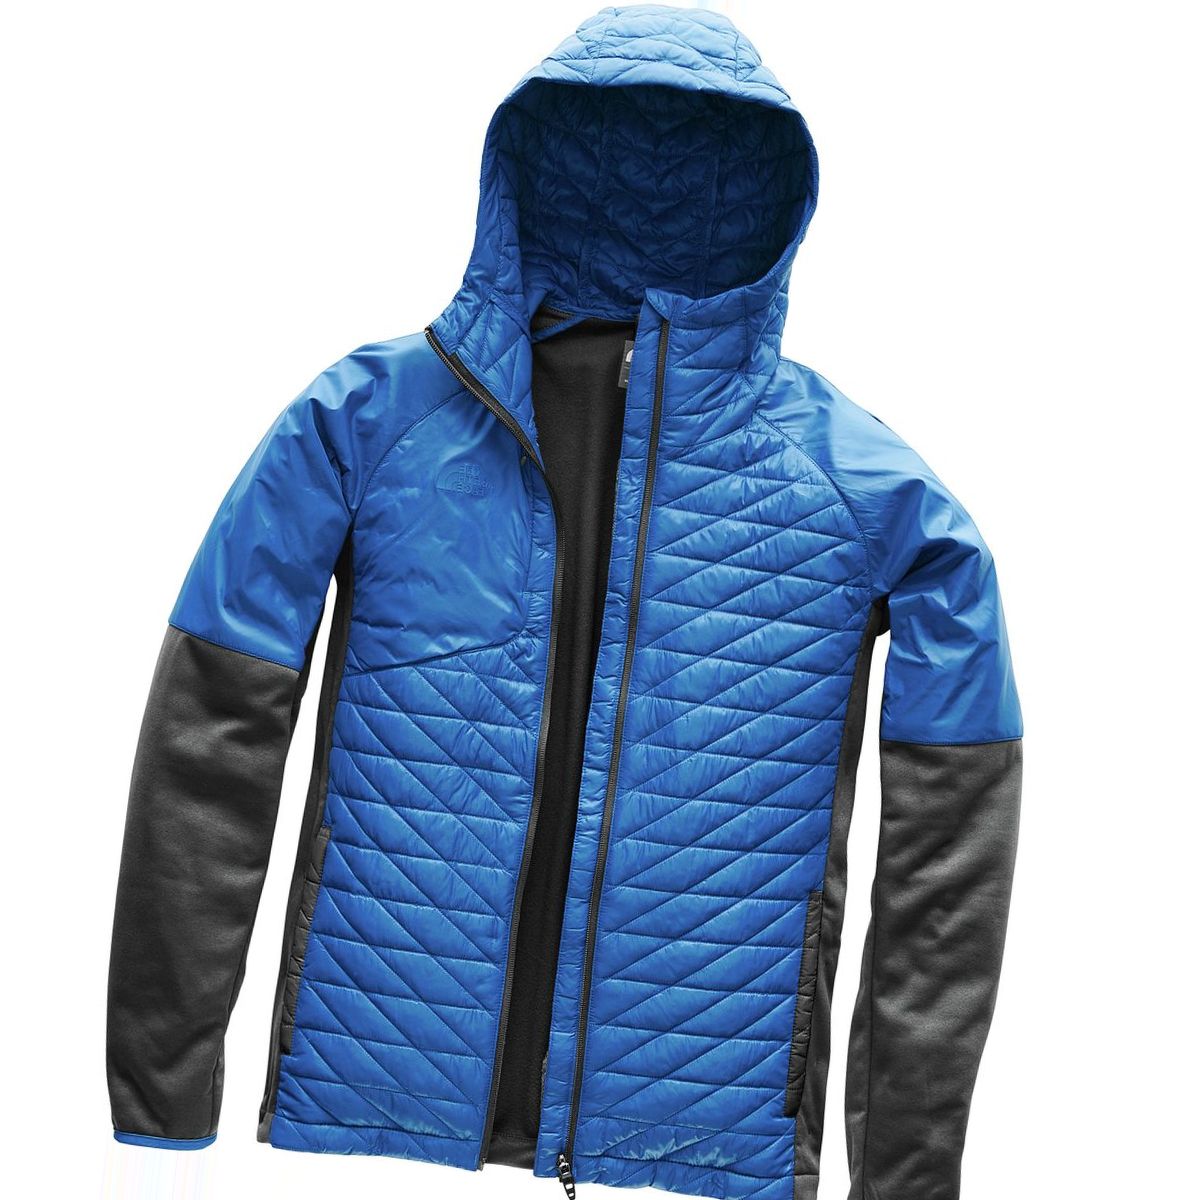 The North Face Kilowatt Thermoball Insulated Jacket - Men's